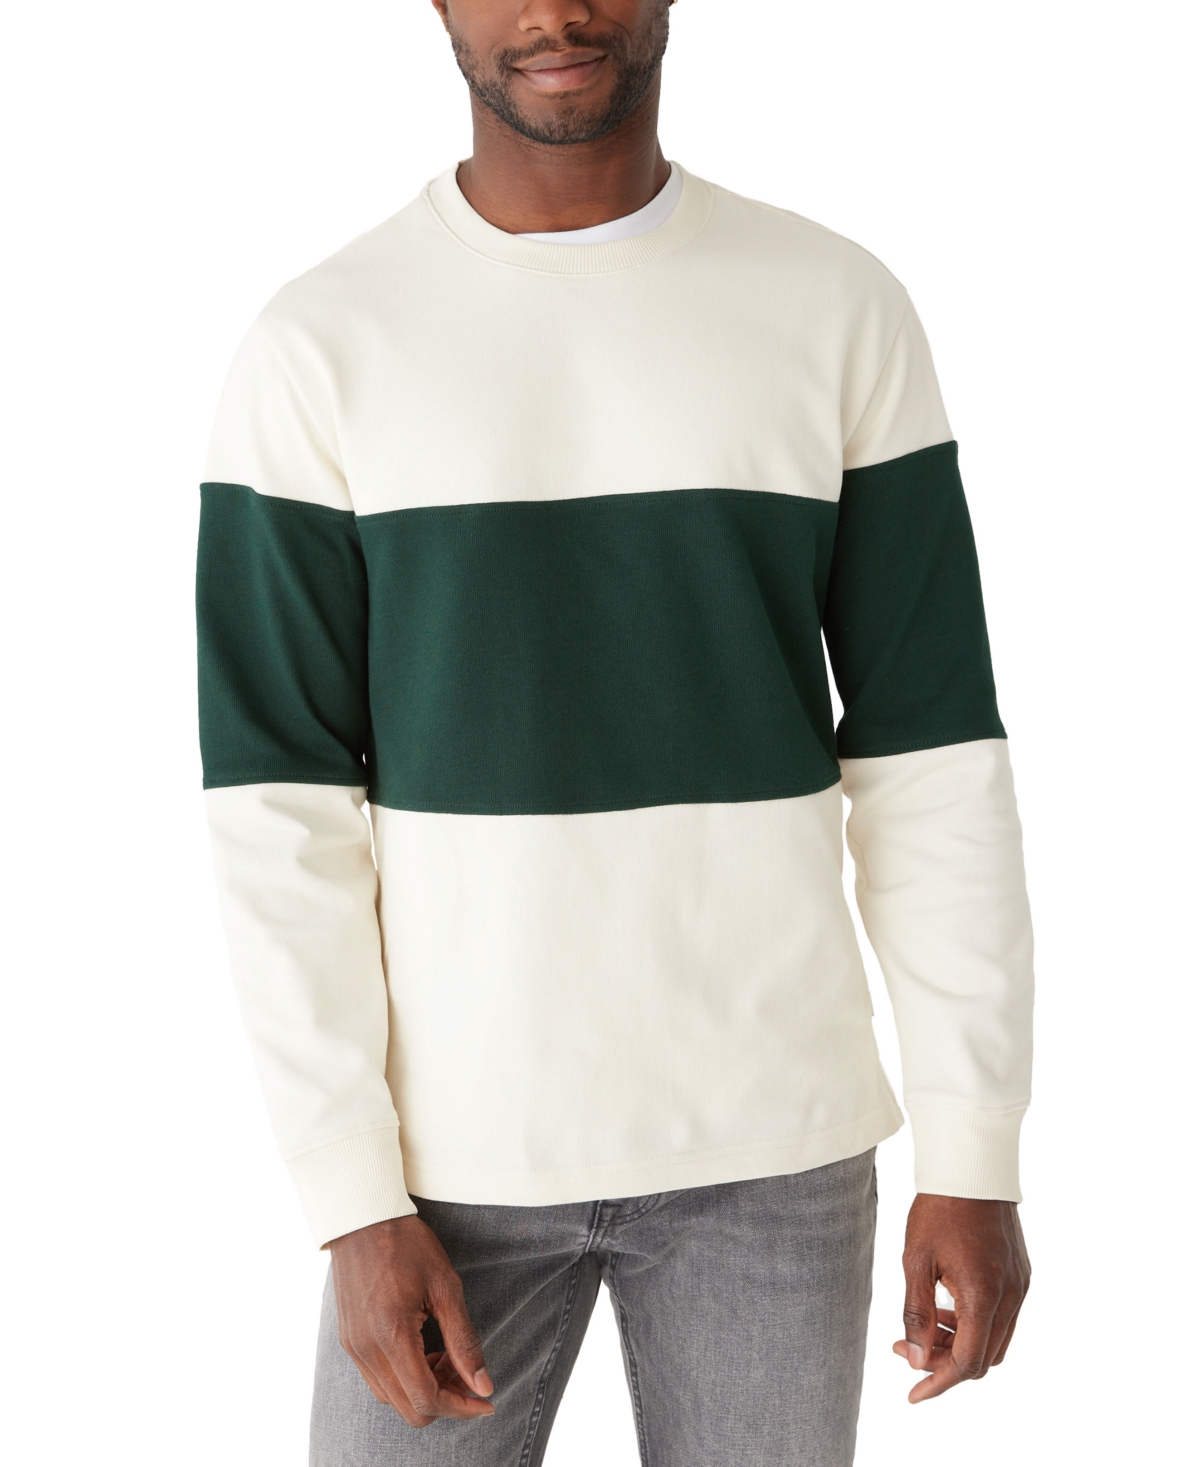 Men's Relaxed Fit Long Sleeve Rugby Stripe Crewneck Sweater - Pine Grove